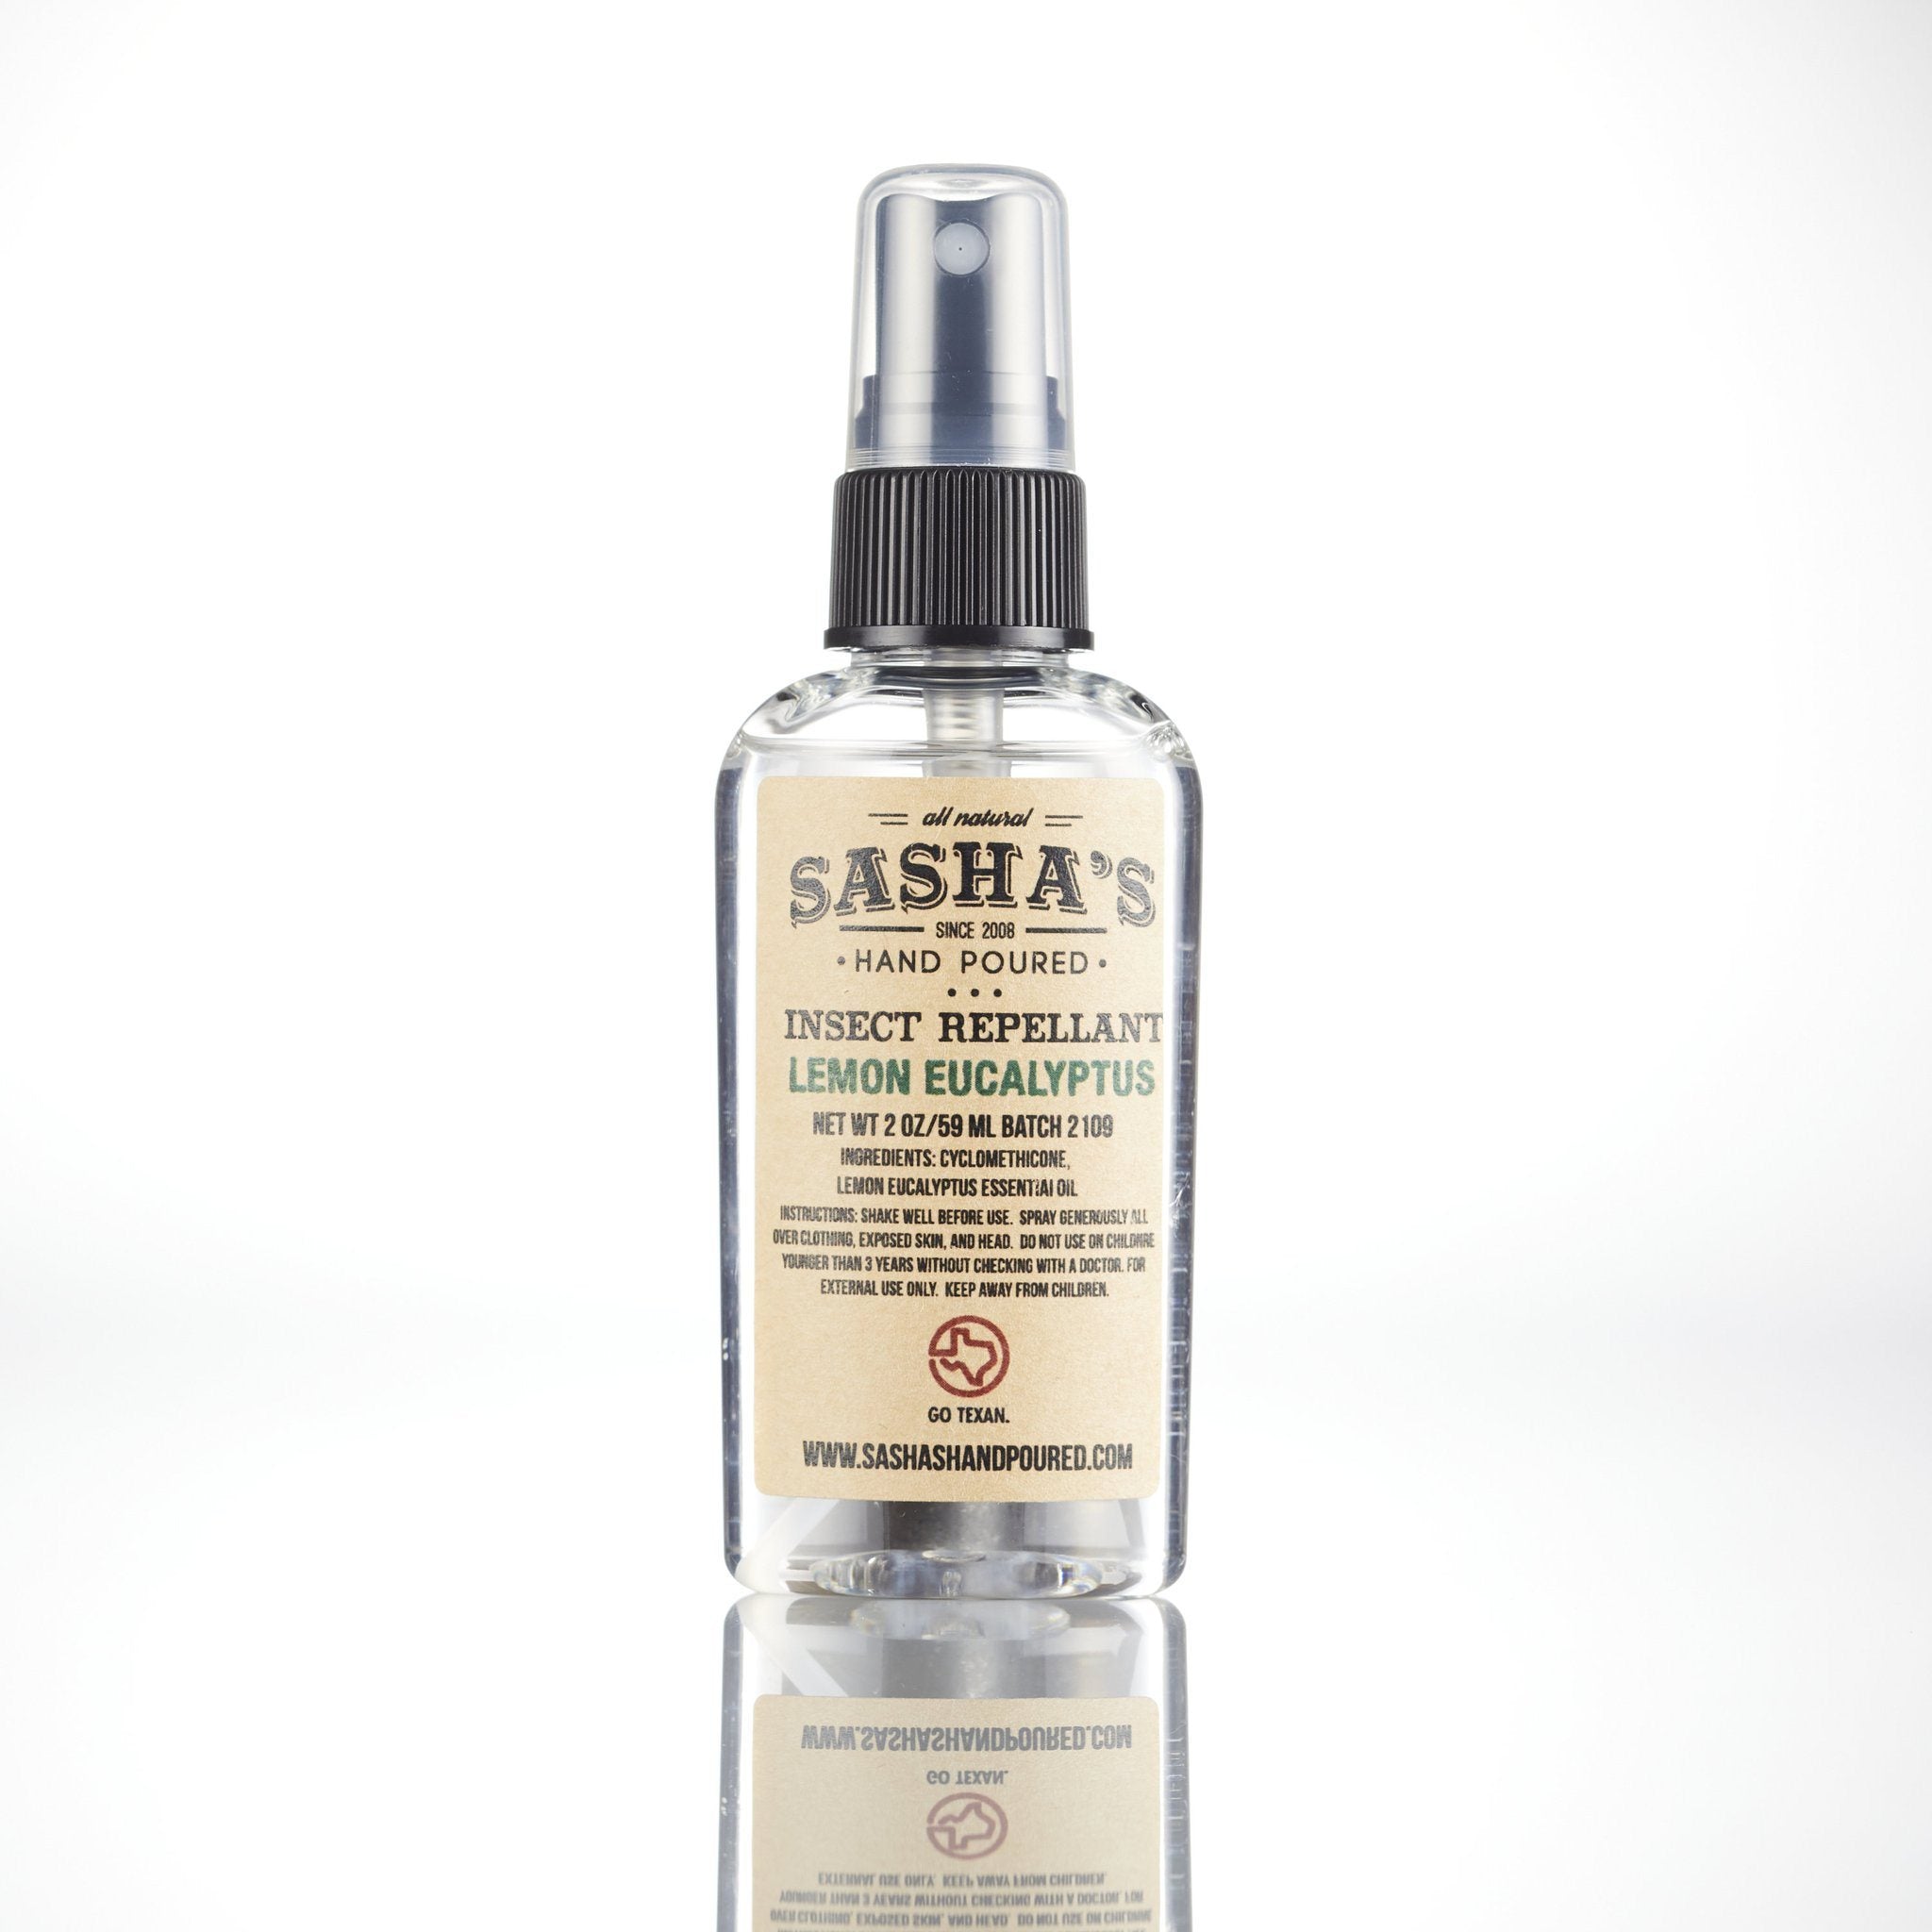 Sasha's Hand Poured Insect Repellent